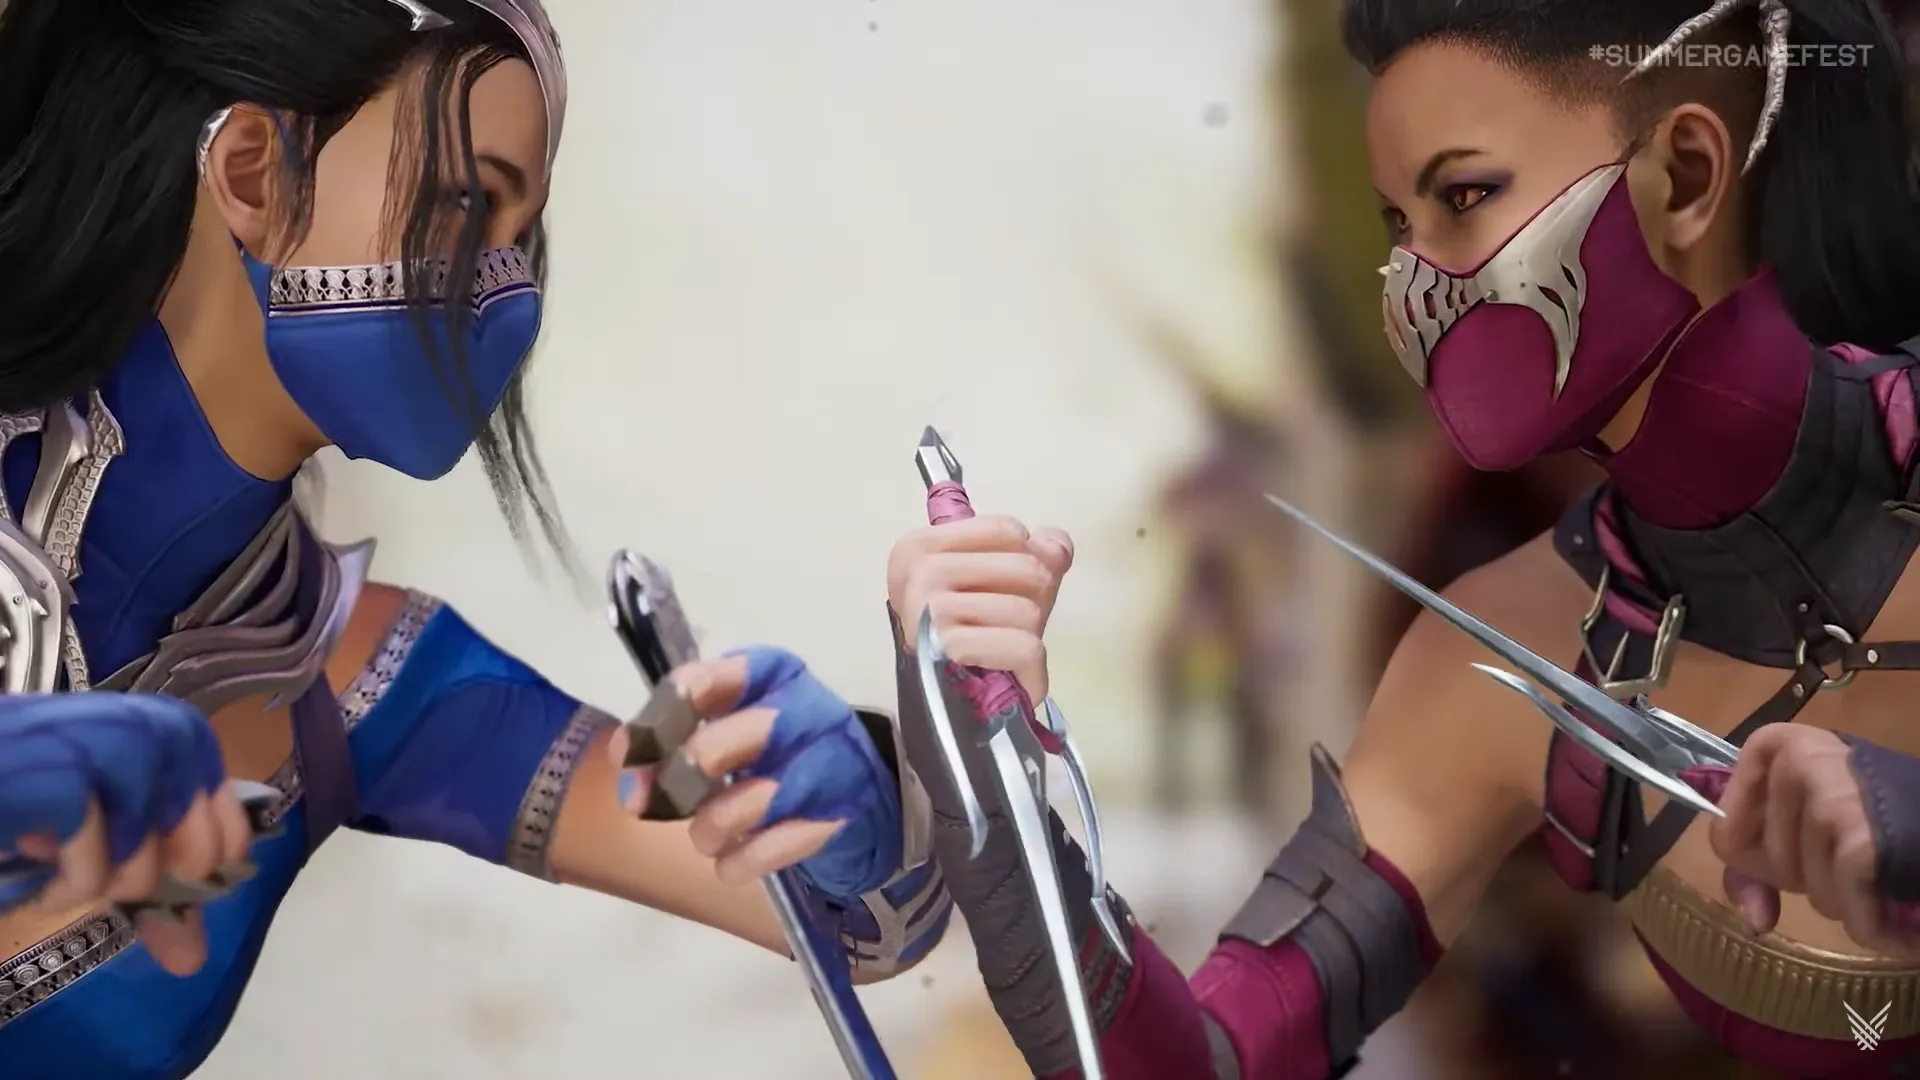 Kitana faces off against her 